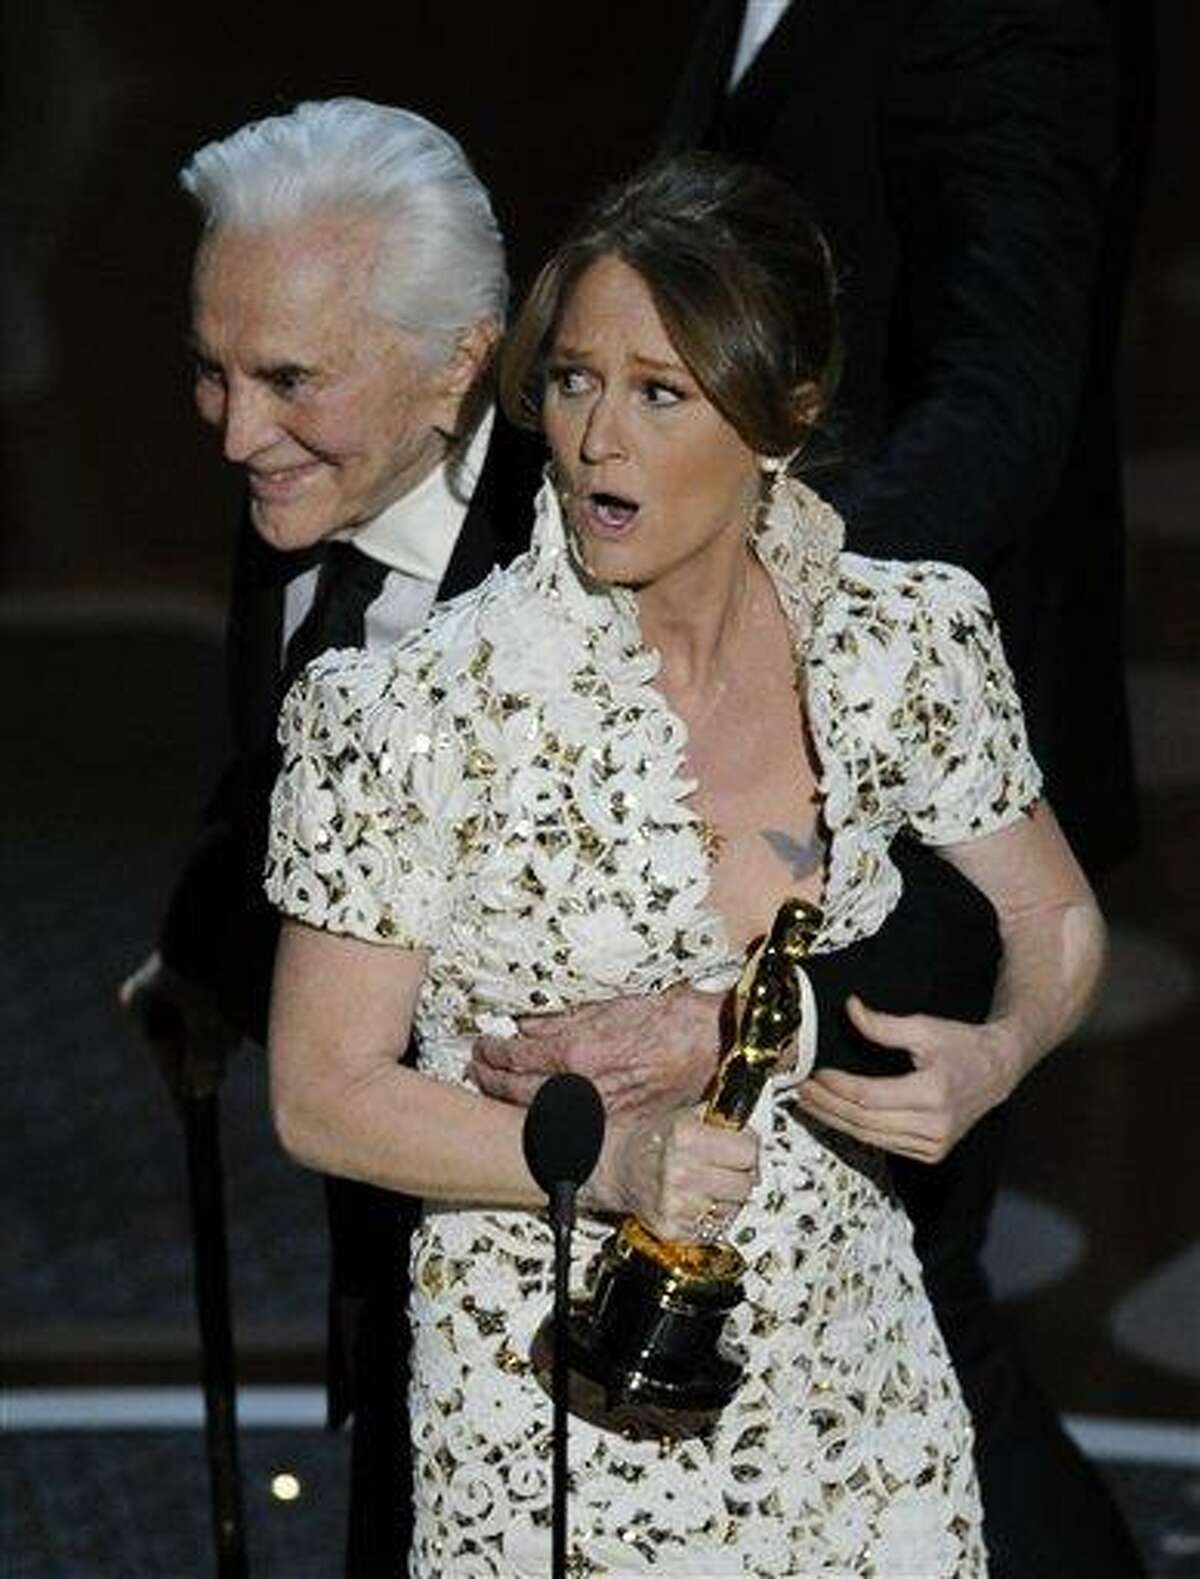 Melissa Leo gets a hug from Kirk Douglass as she accepts the Oscar for best actress in a supporting role for "The Fighter" at the 83rd Academy Awards on Sunday, Feb. 27, 2011, in the Hollywood section of Los Angeles. (AP Photo/Mark J. Terrill)